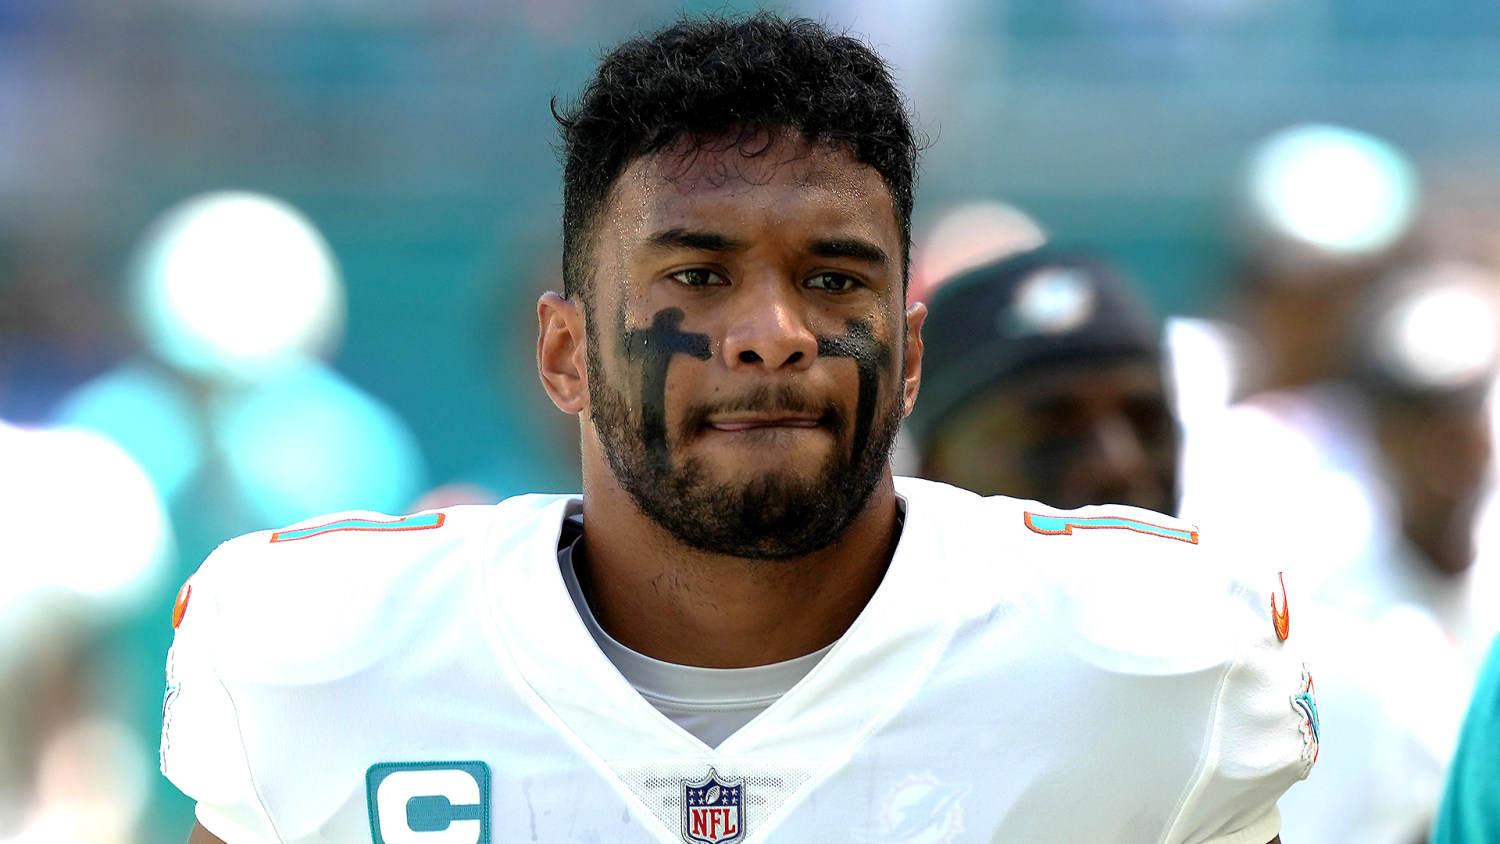 Consultant who cleared Dolphins Tagovailoa to play after head blow is fired